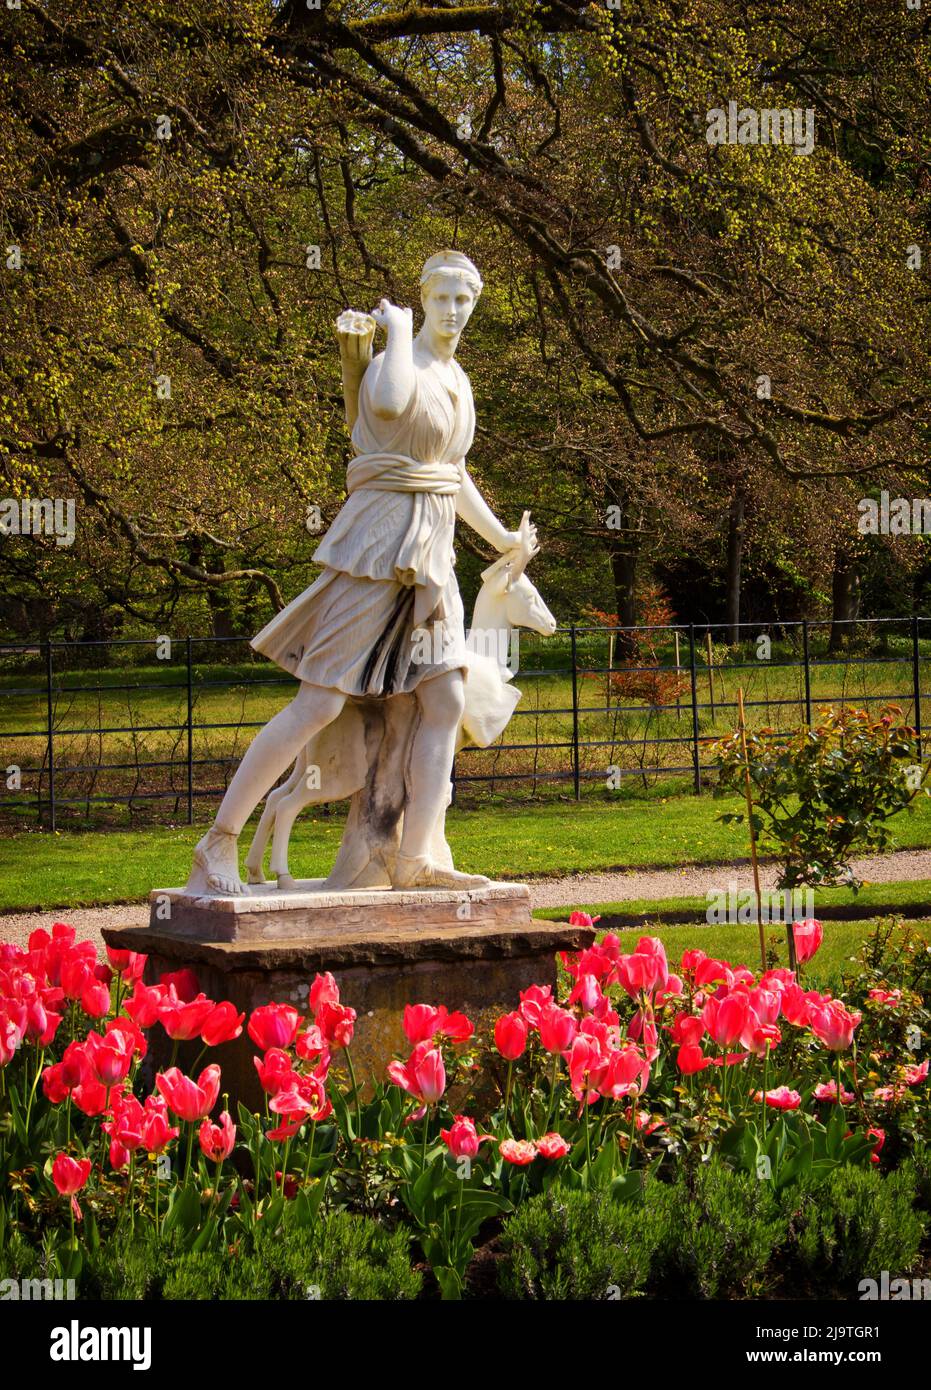 A statue in the grounds of Lytham Hall, surrounded by spring flowers Stock Photo